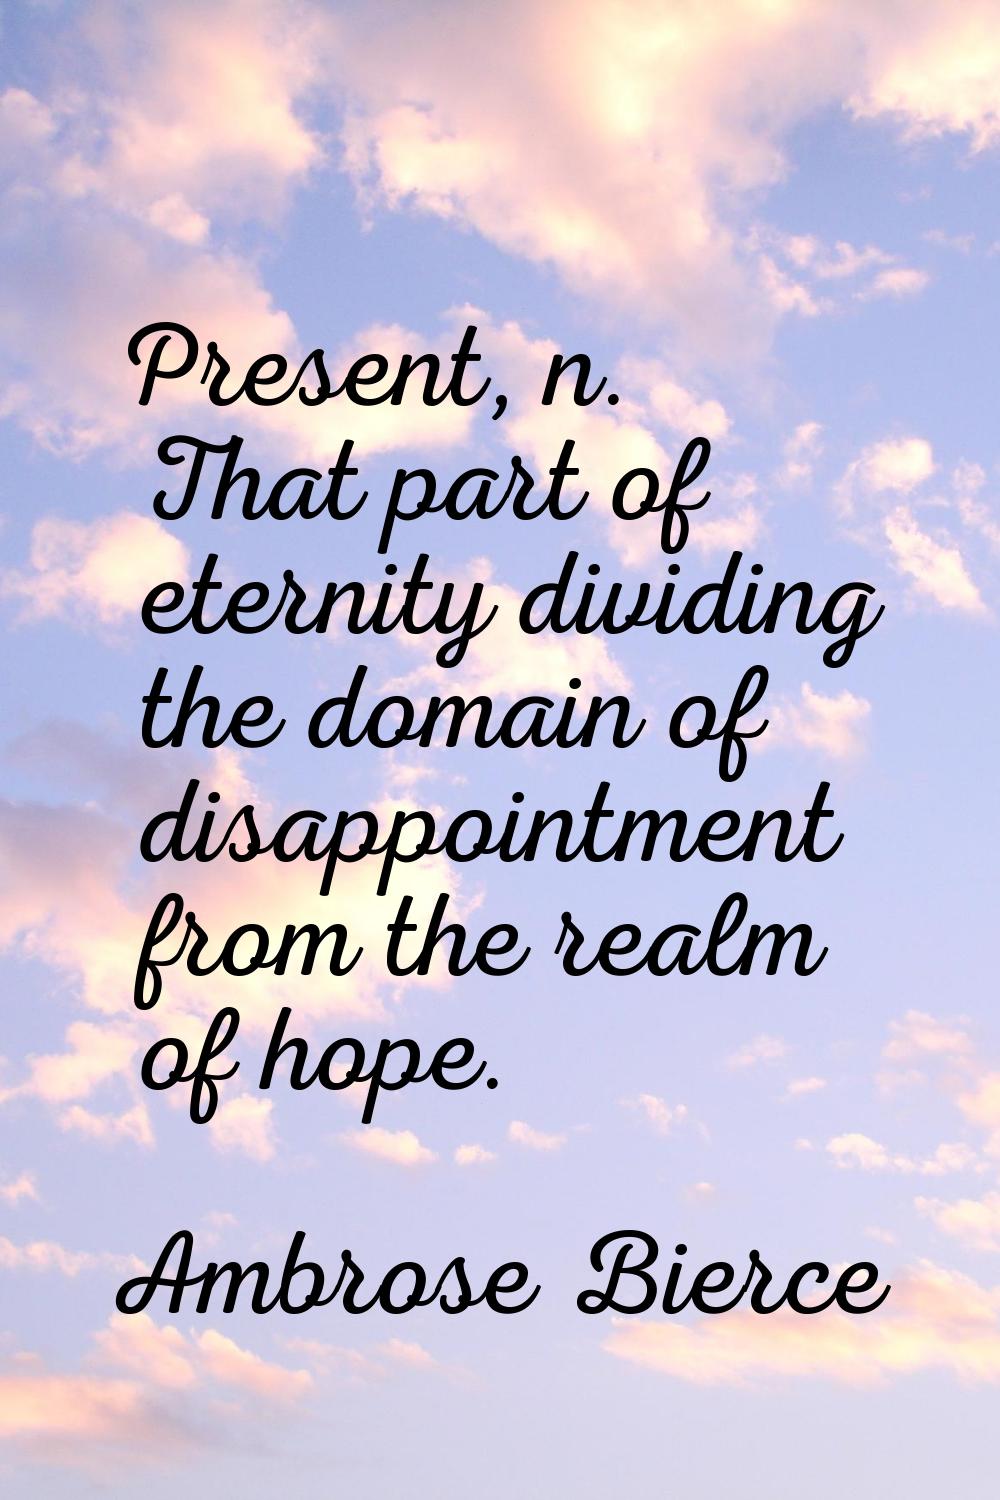 Present, n. That part of eternity dividing the domain of disappointment from the realm of hope.